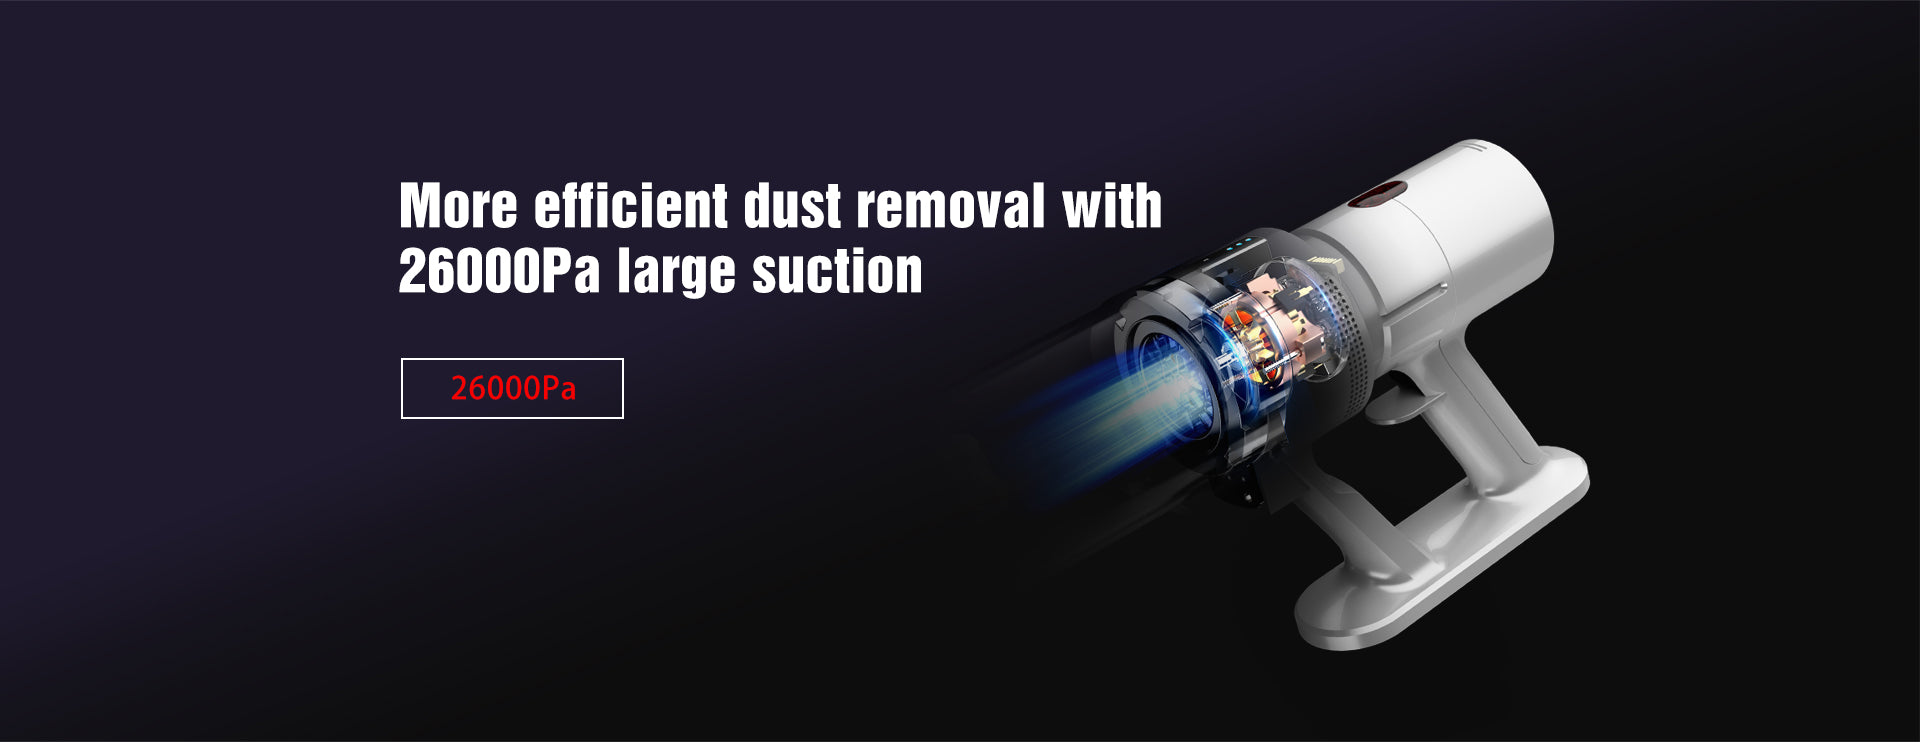 More_efficient_dust_removal_with 26000Pa_large_suction